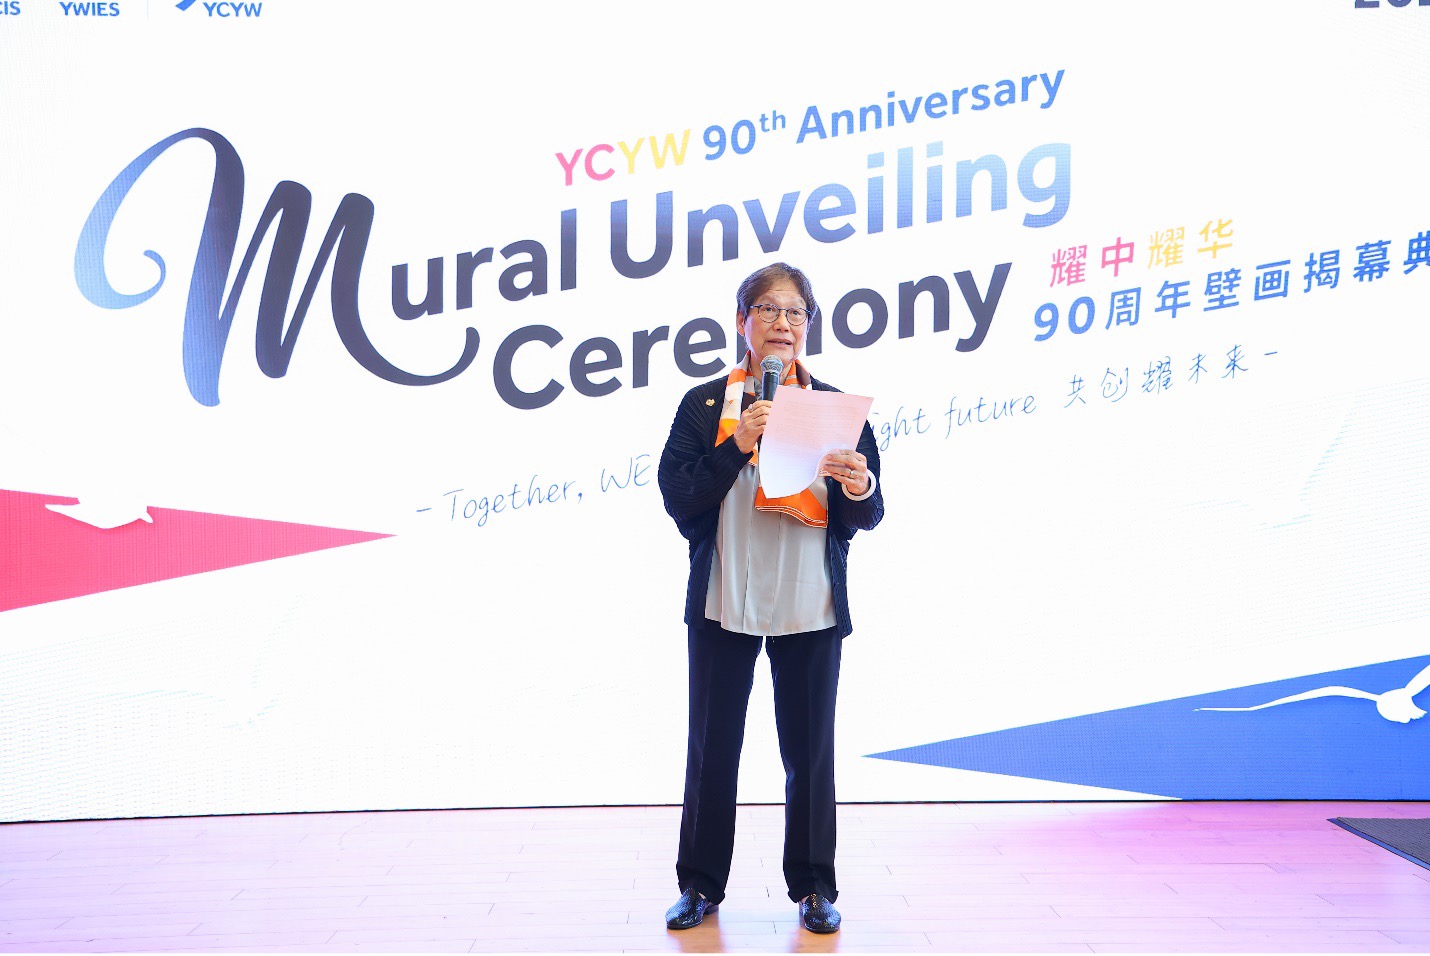 Dr Betty Chan Po-king, CEO and School Supervisor of Yew Chung Yew Wah Education Network delivered her opening speech.